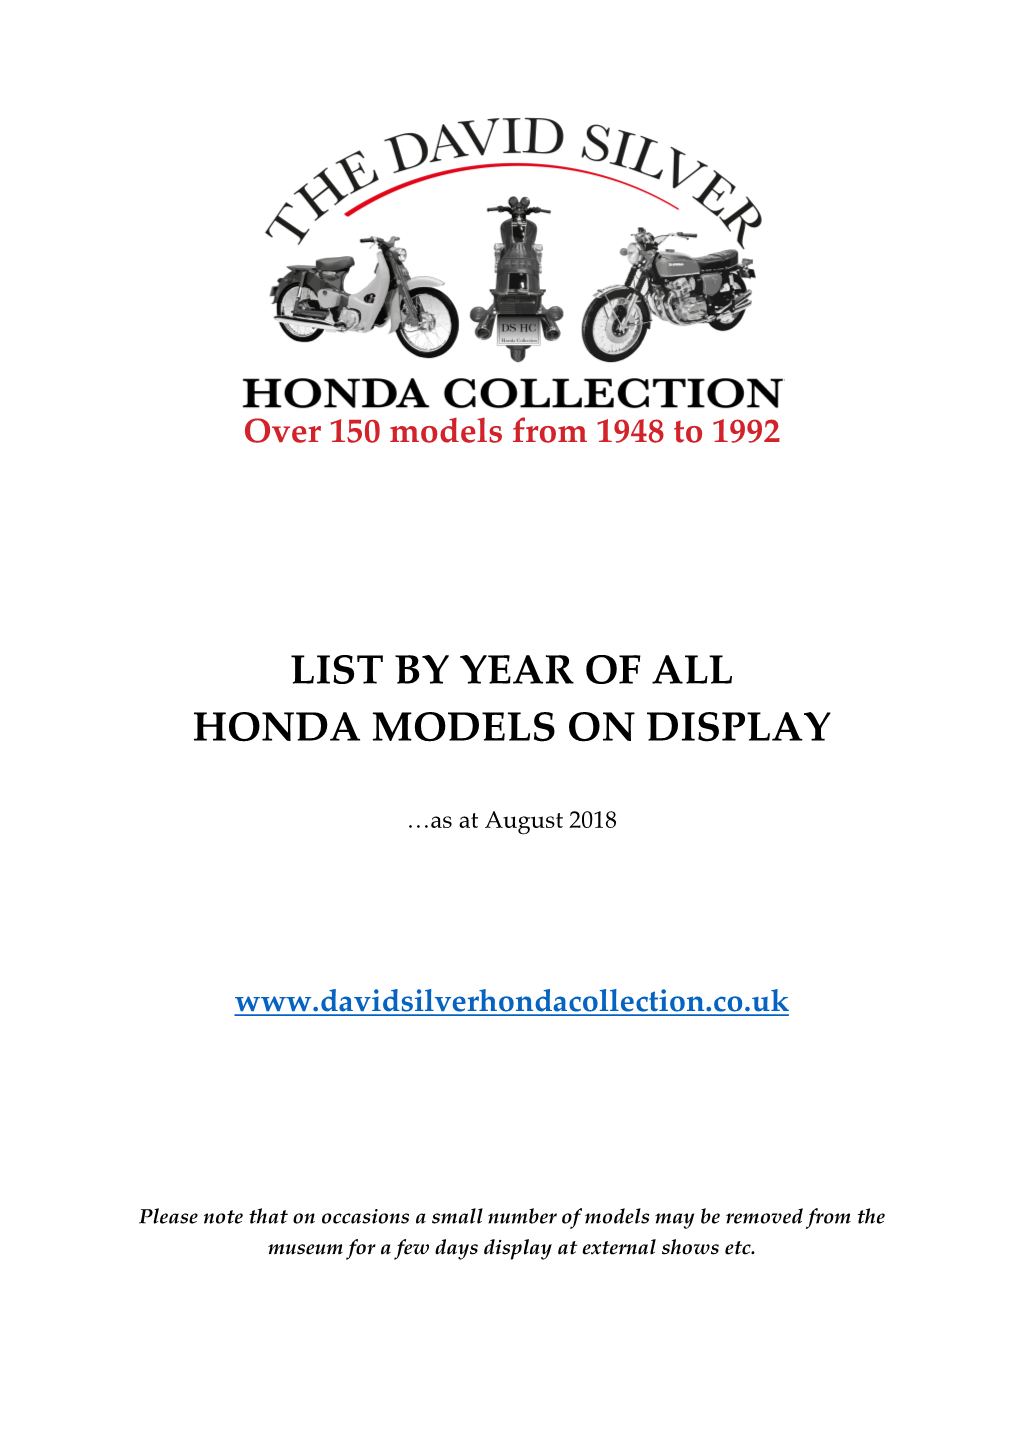 List by Year of All Honda Models on Display